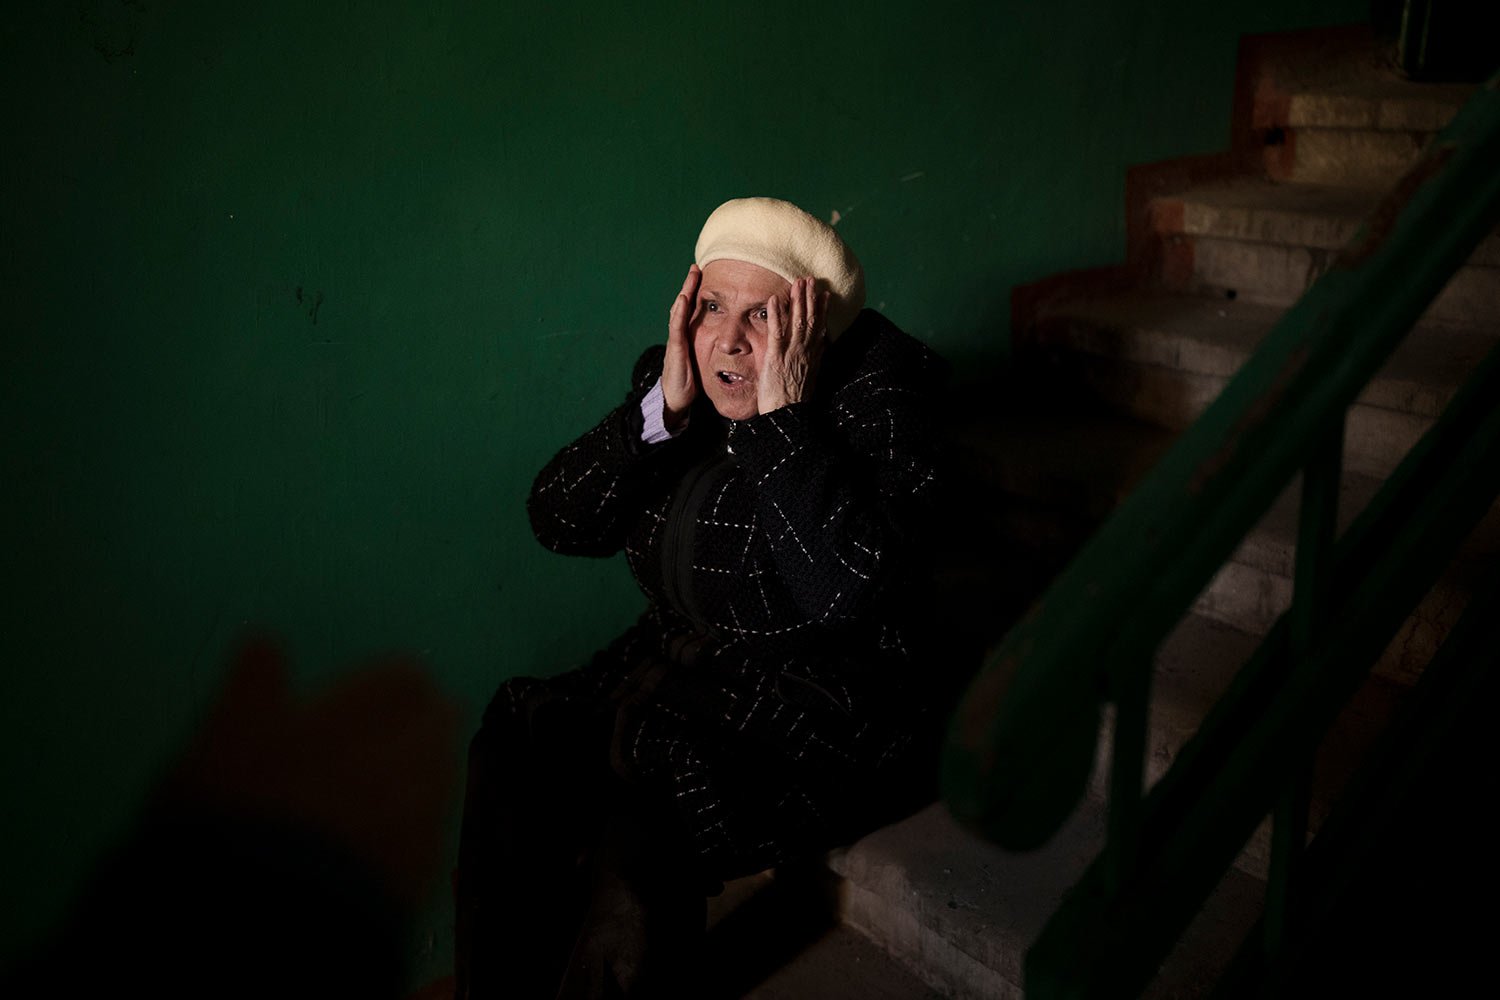  A woman reacts next to the body of a 15-year-old boy killed during a Russian attack in Kharkiv, Ukraine, Friday, April 15, 2022. (AP Photo/Felipe Dana)  